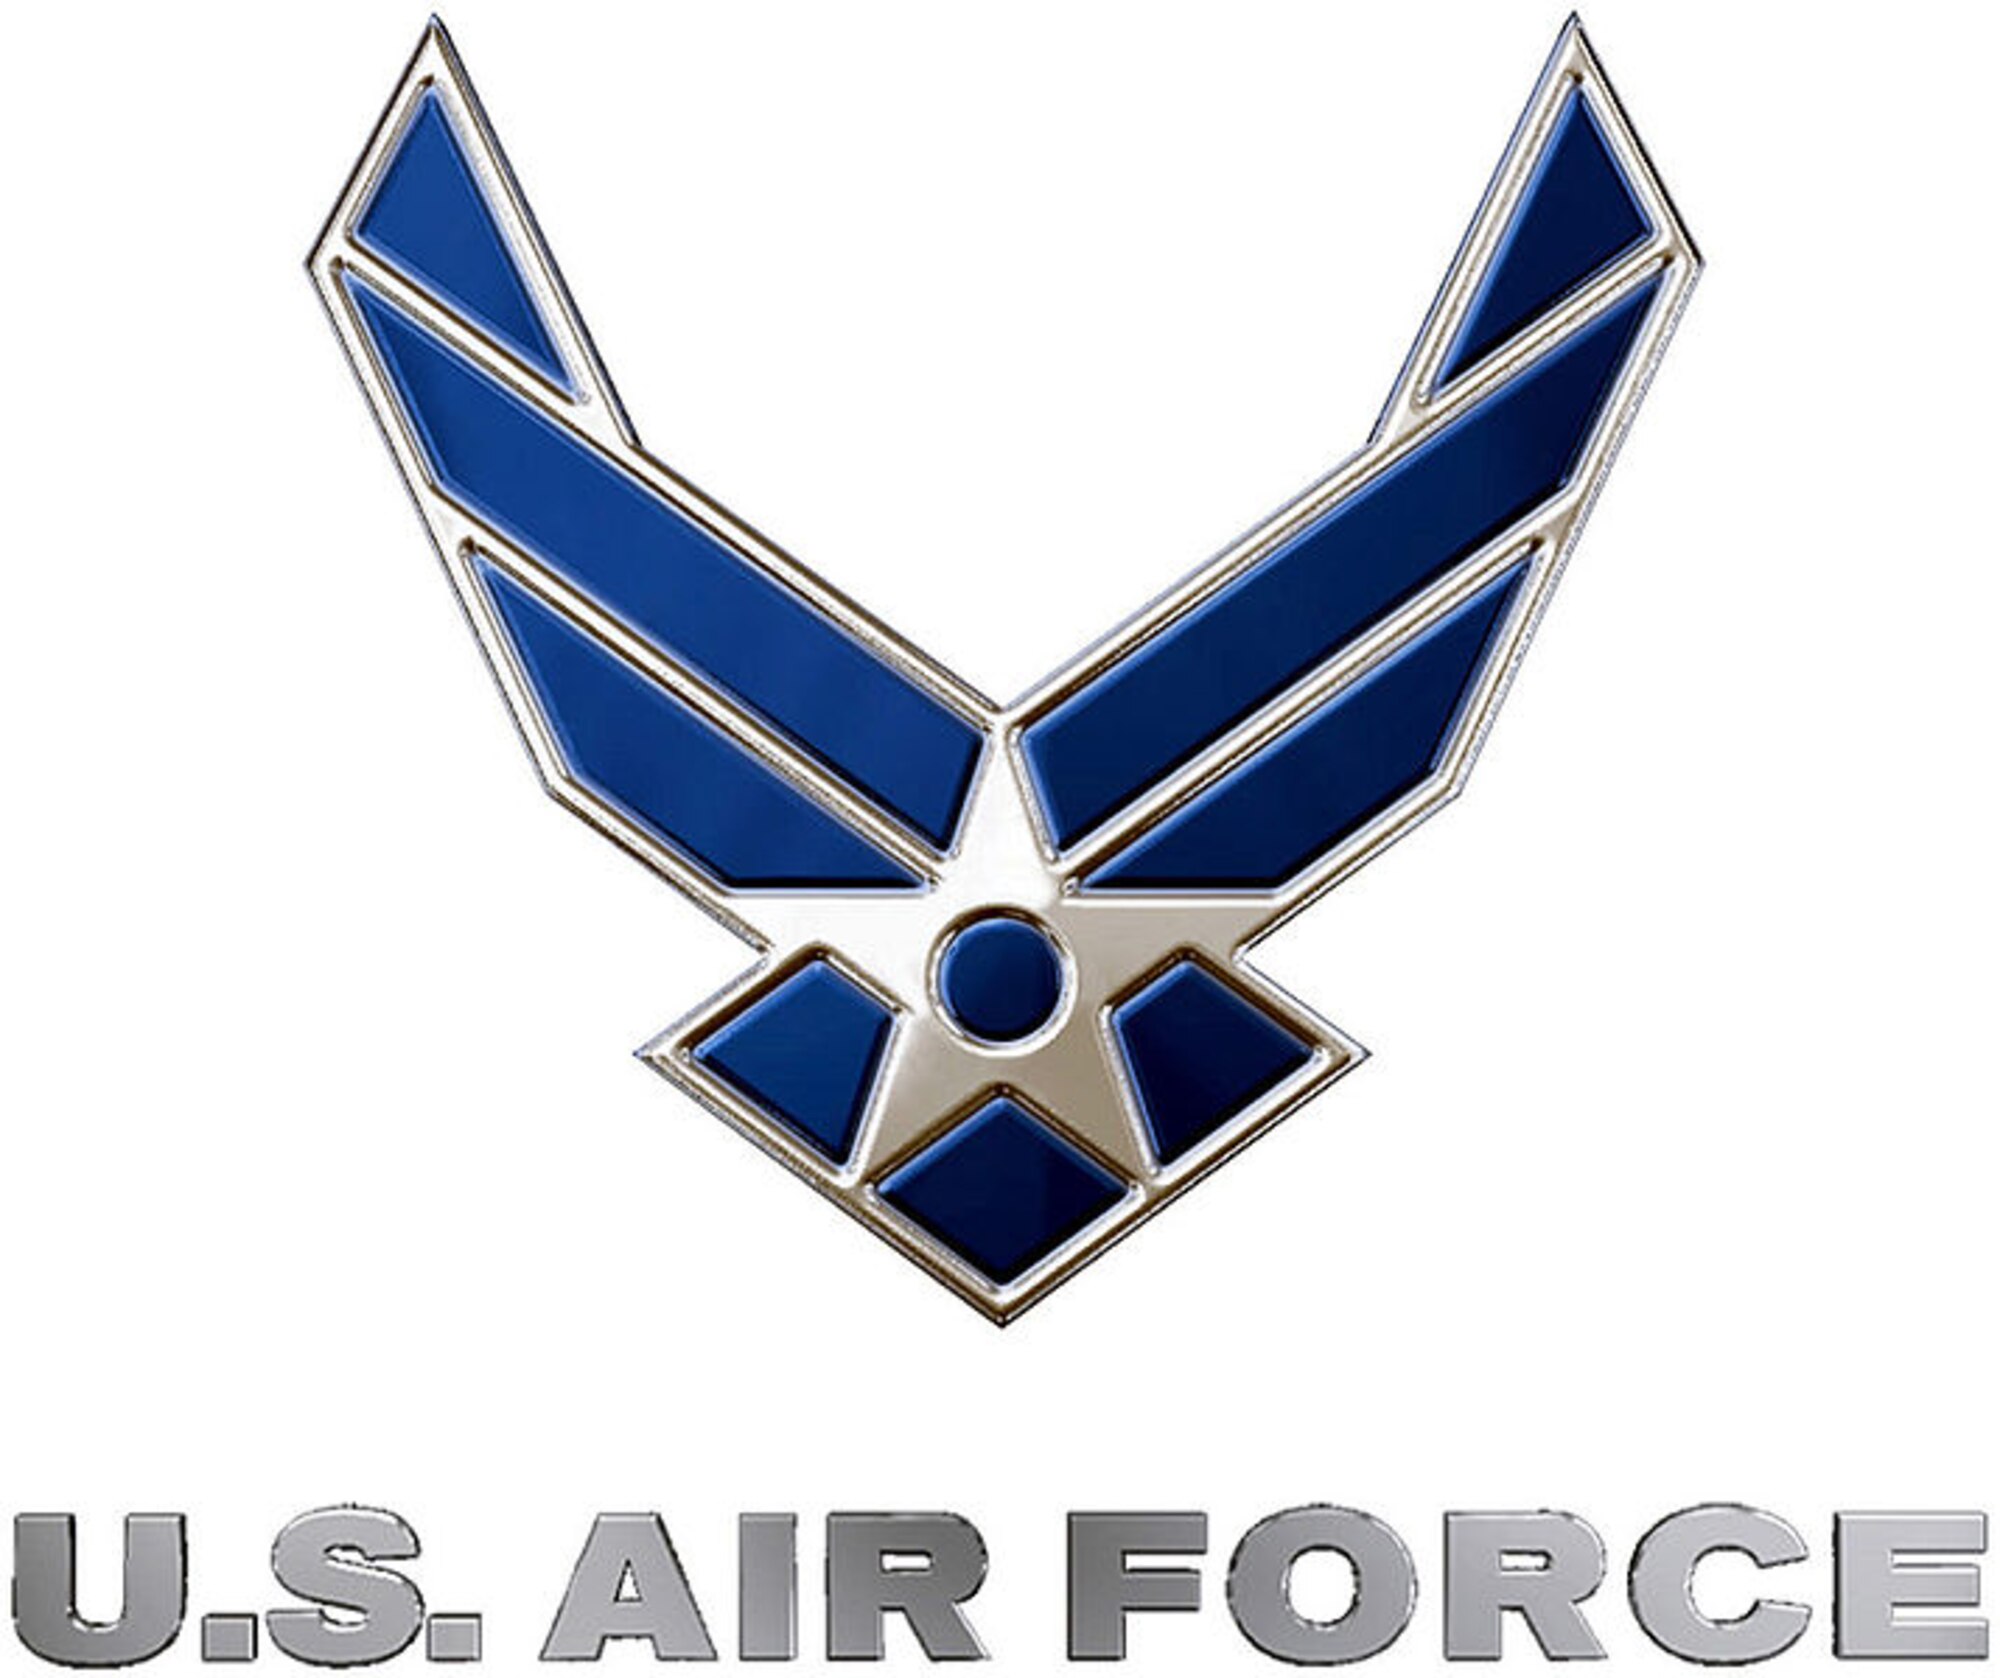 The Air Force Symbol is the official symbol of the United States Air Force. It honors the heritage of our past and represents the promise of our future. Furthermore, it retains the core elements of our Air Corps heritage the Arnold wings and star with circle and modernizes them to reflect our air and space force of today and tomorrow.